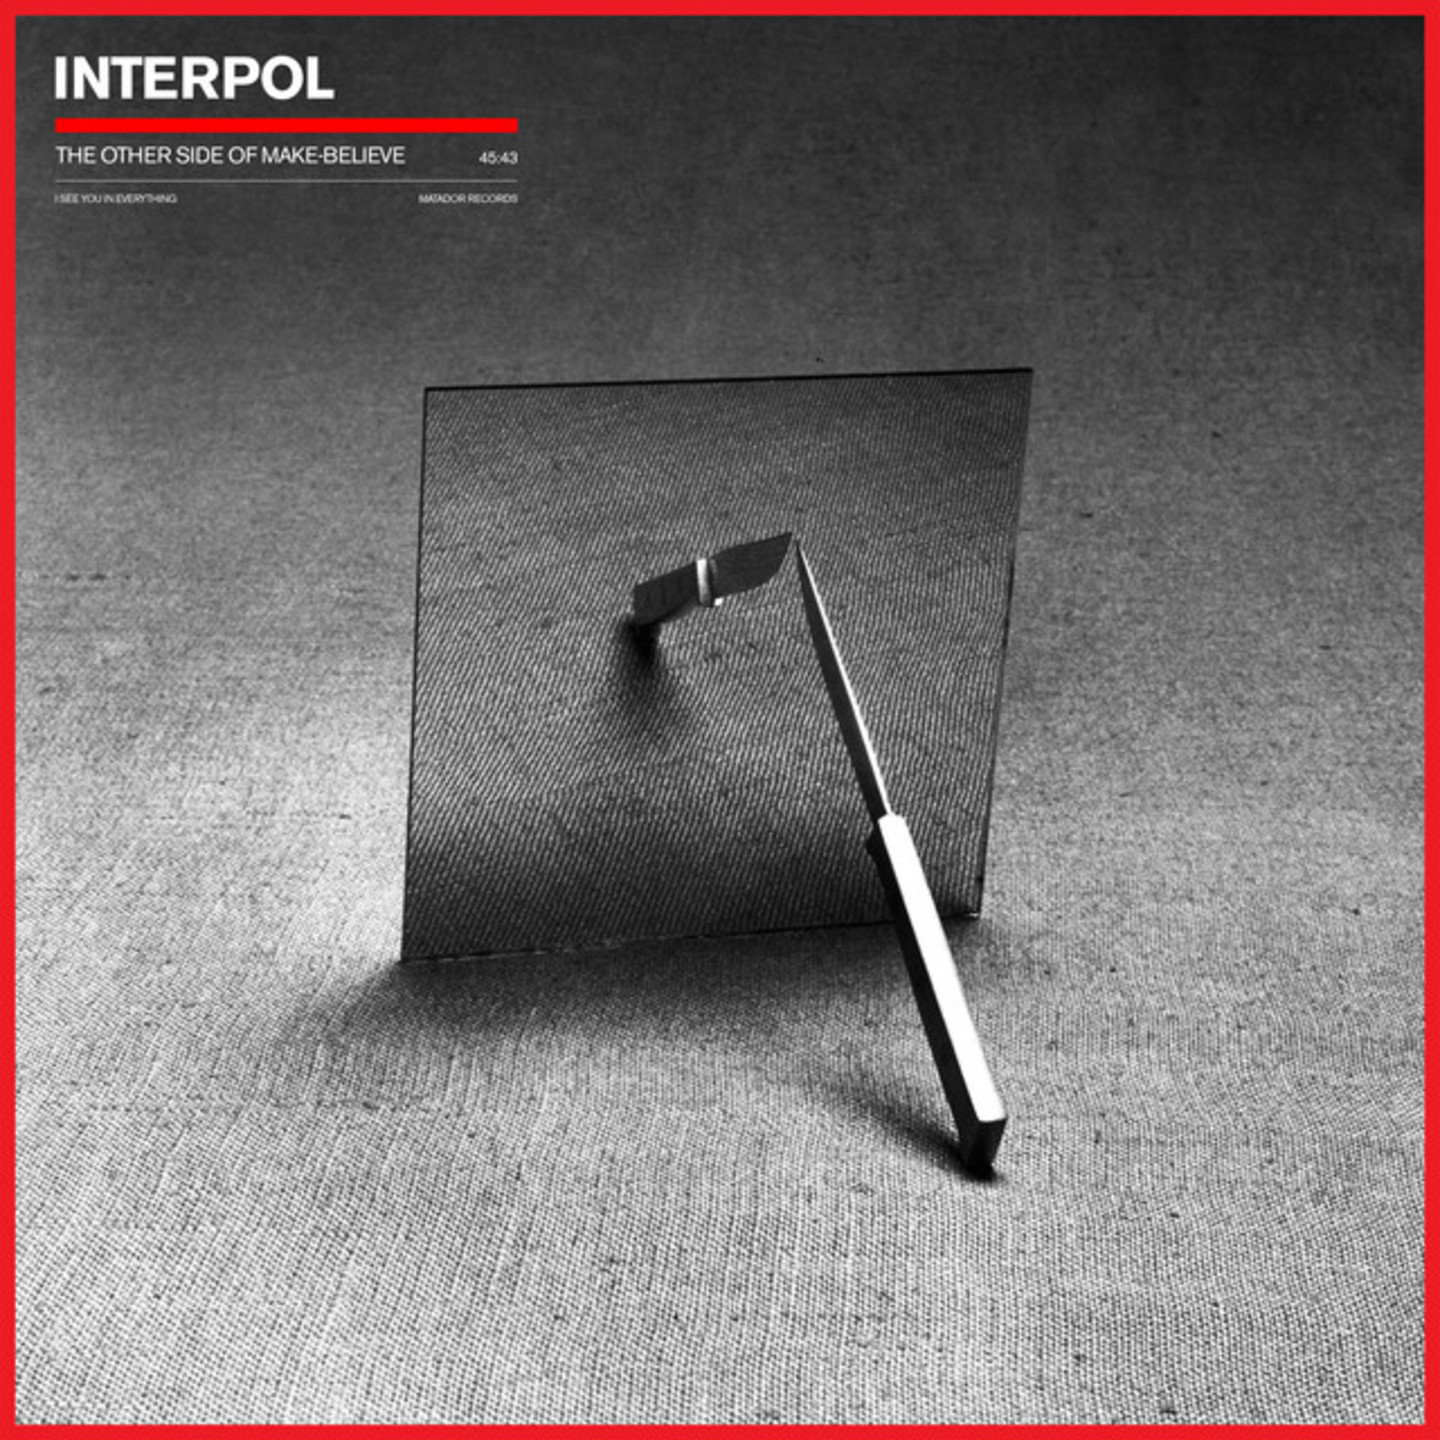 INTERPOL - The Other Side of Make-Believe LP